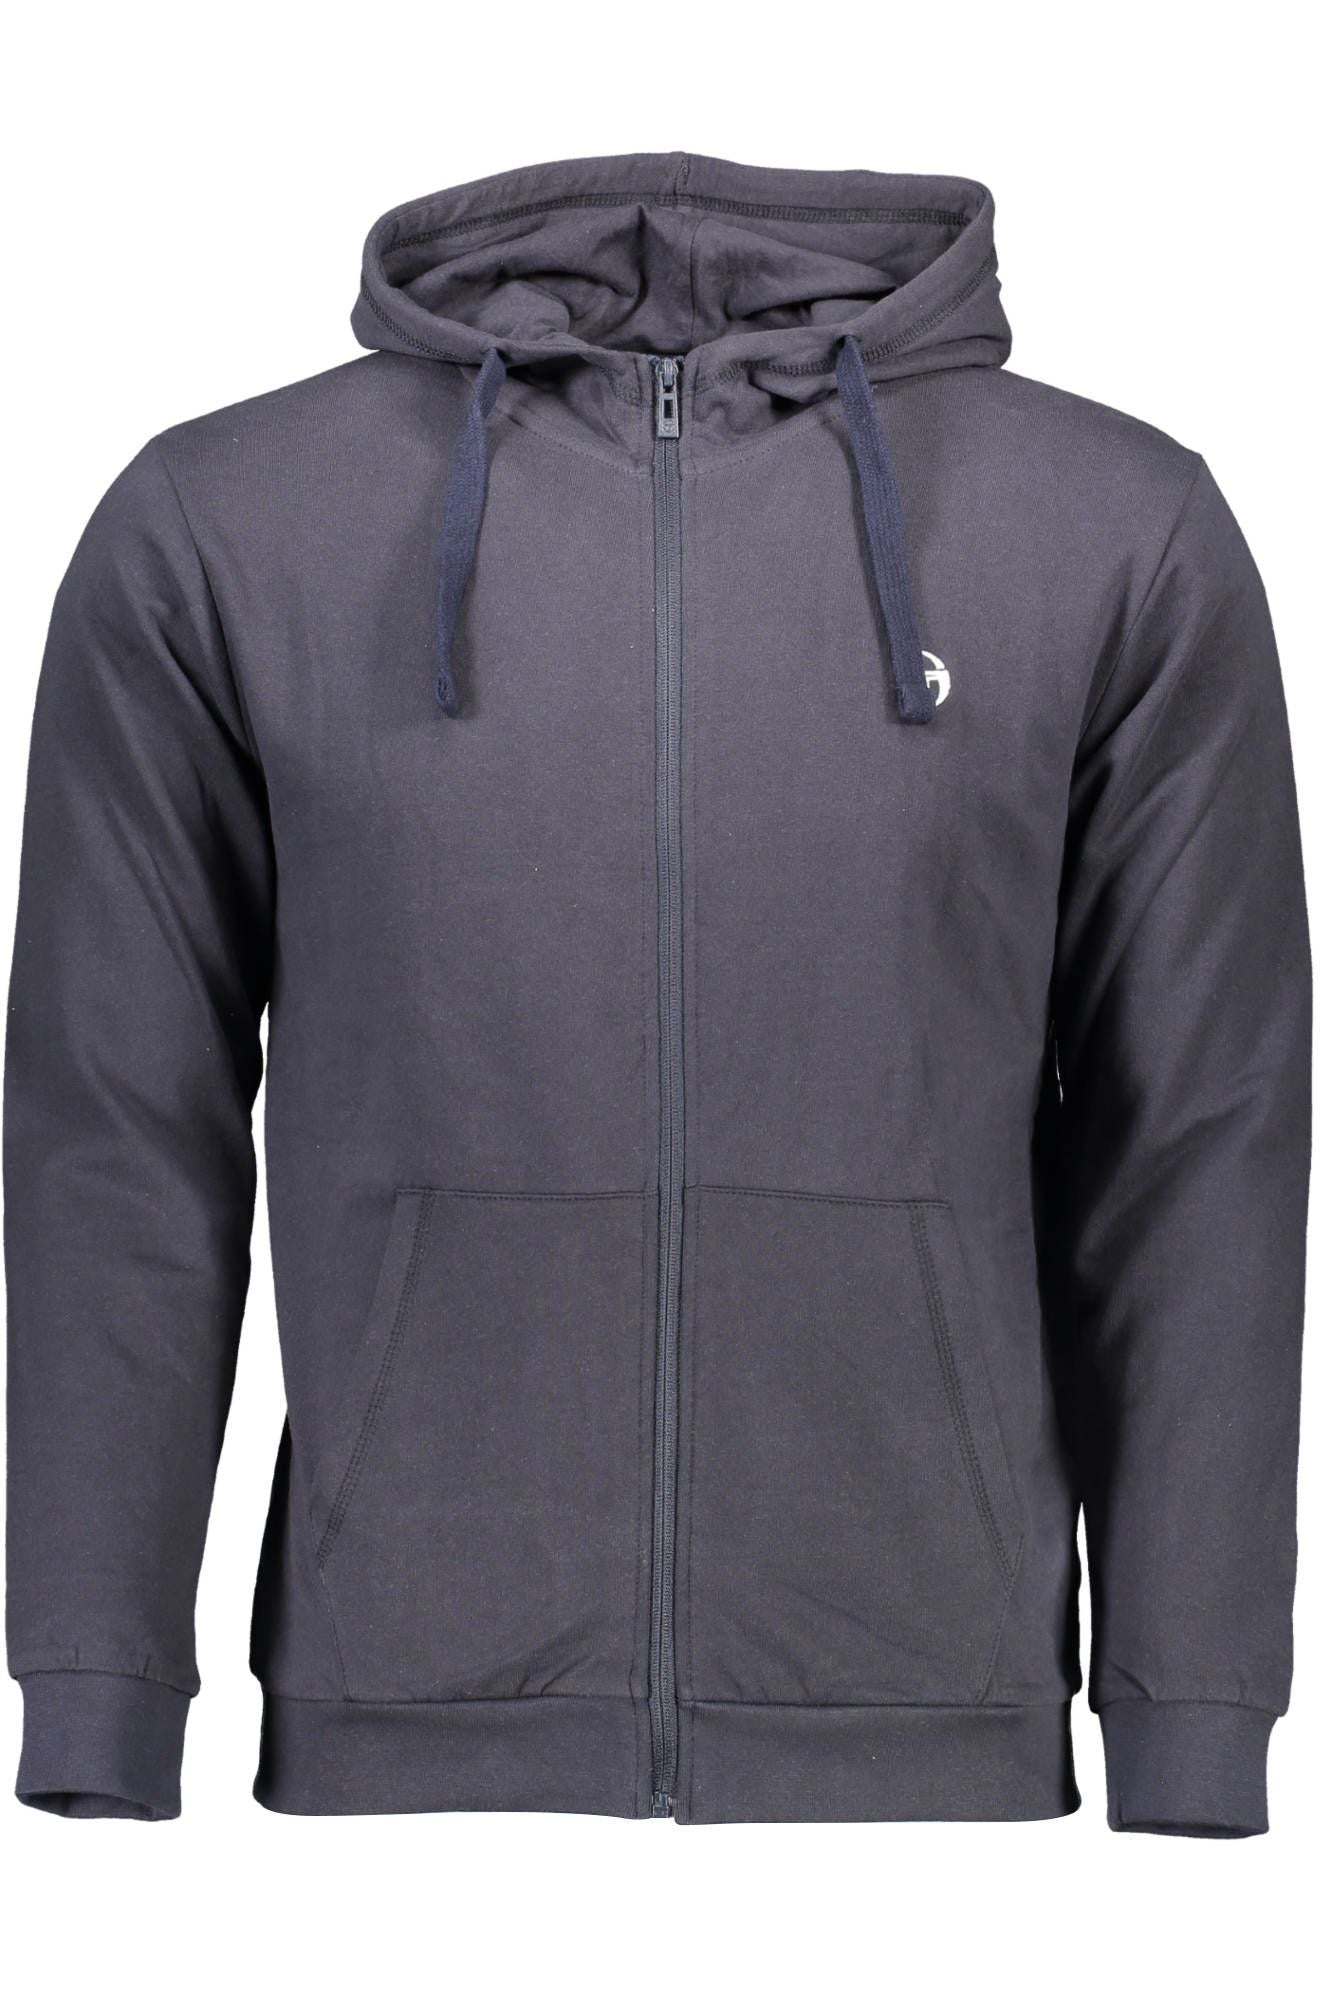 Sergio Tacchini Blue Hooded Zip-Up Cotton Sweater